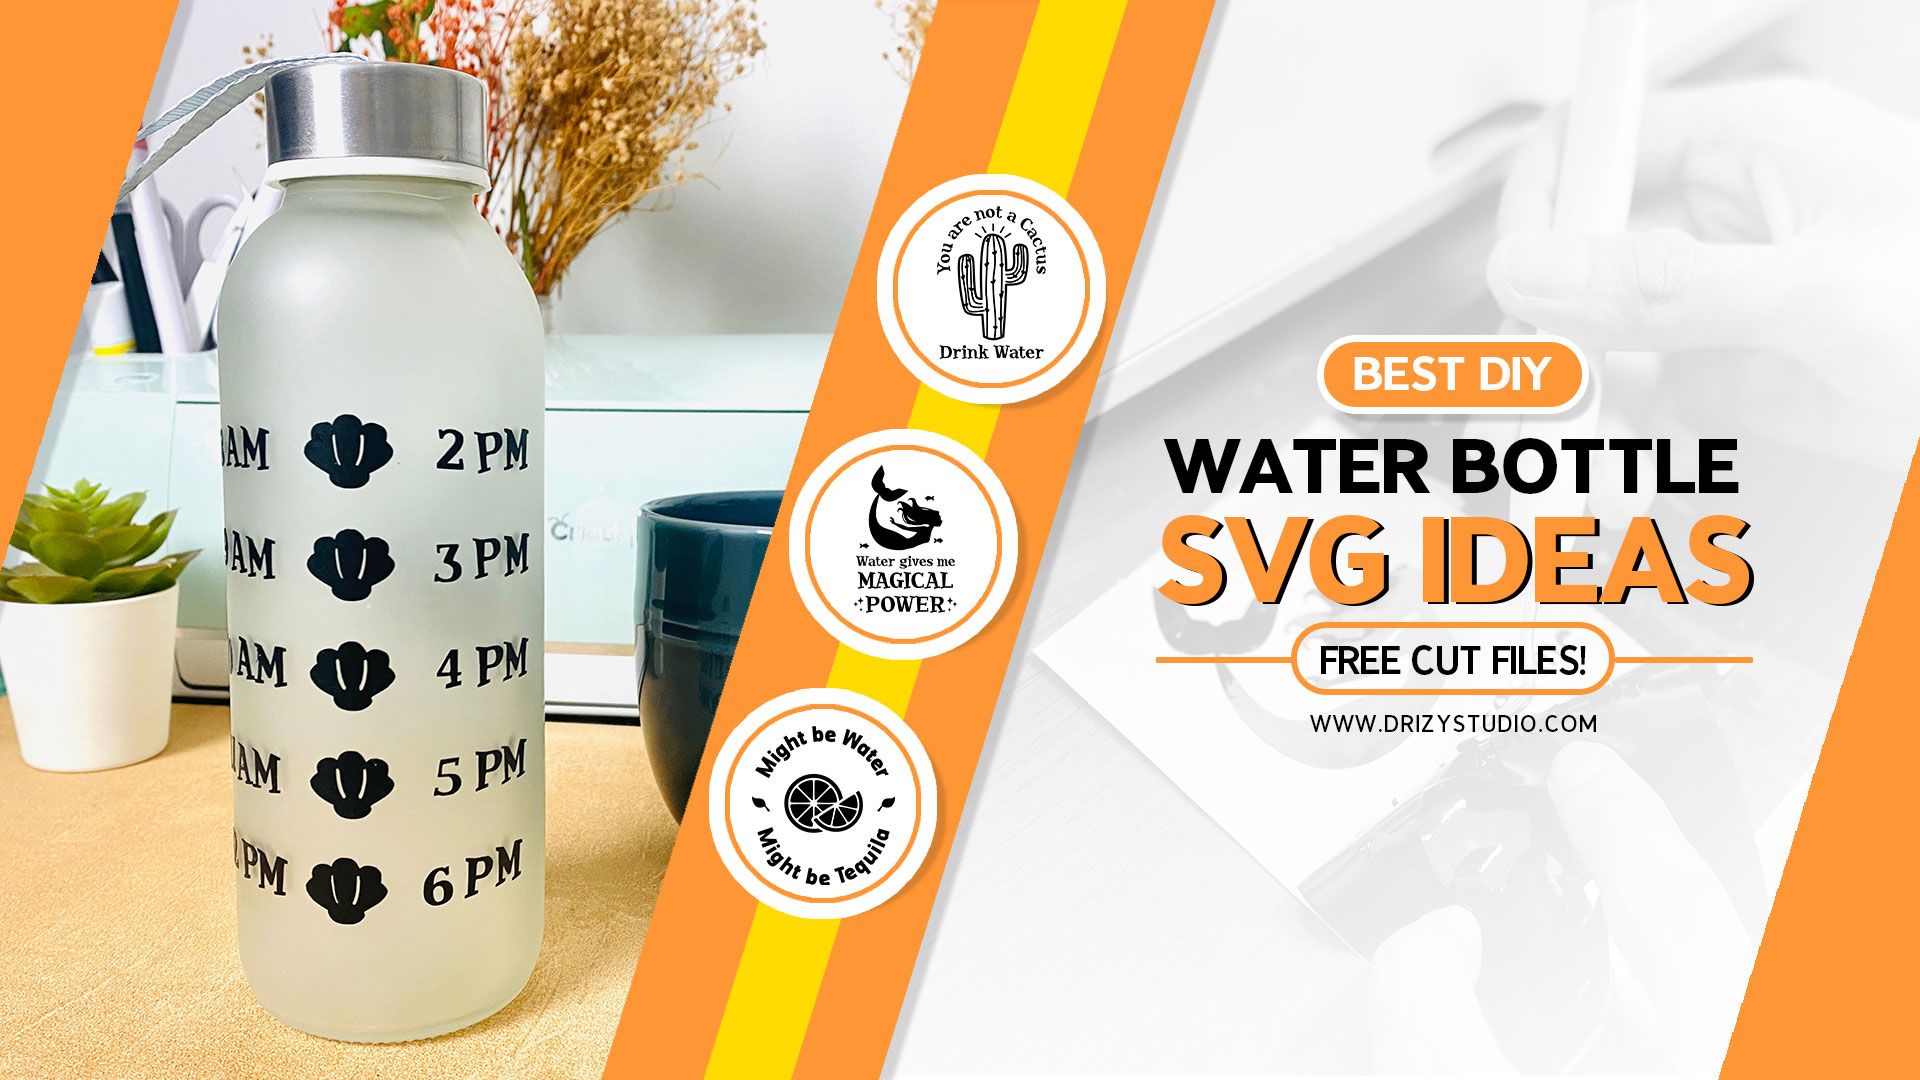 Best DIY Water Bottle SVG Ideas, Free Cut Files! Post Image Cover